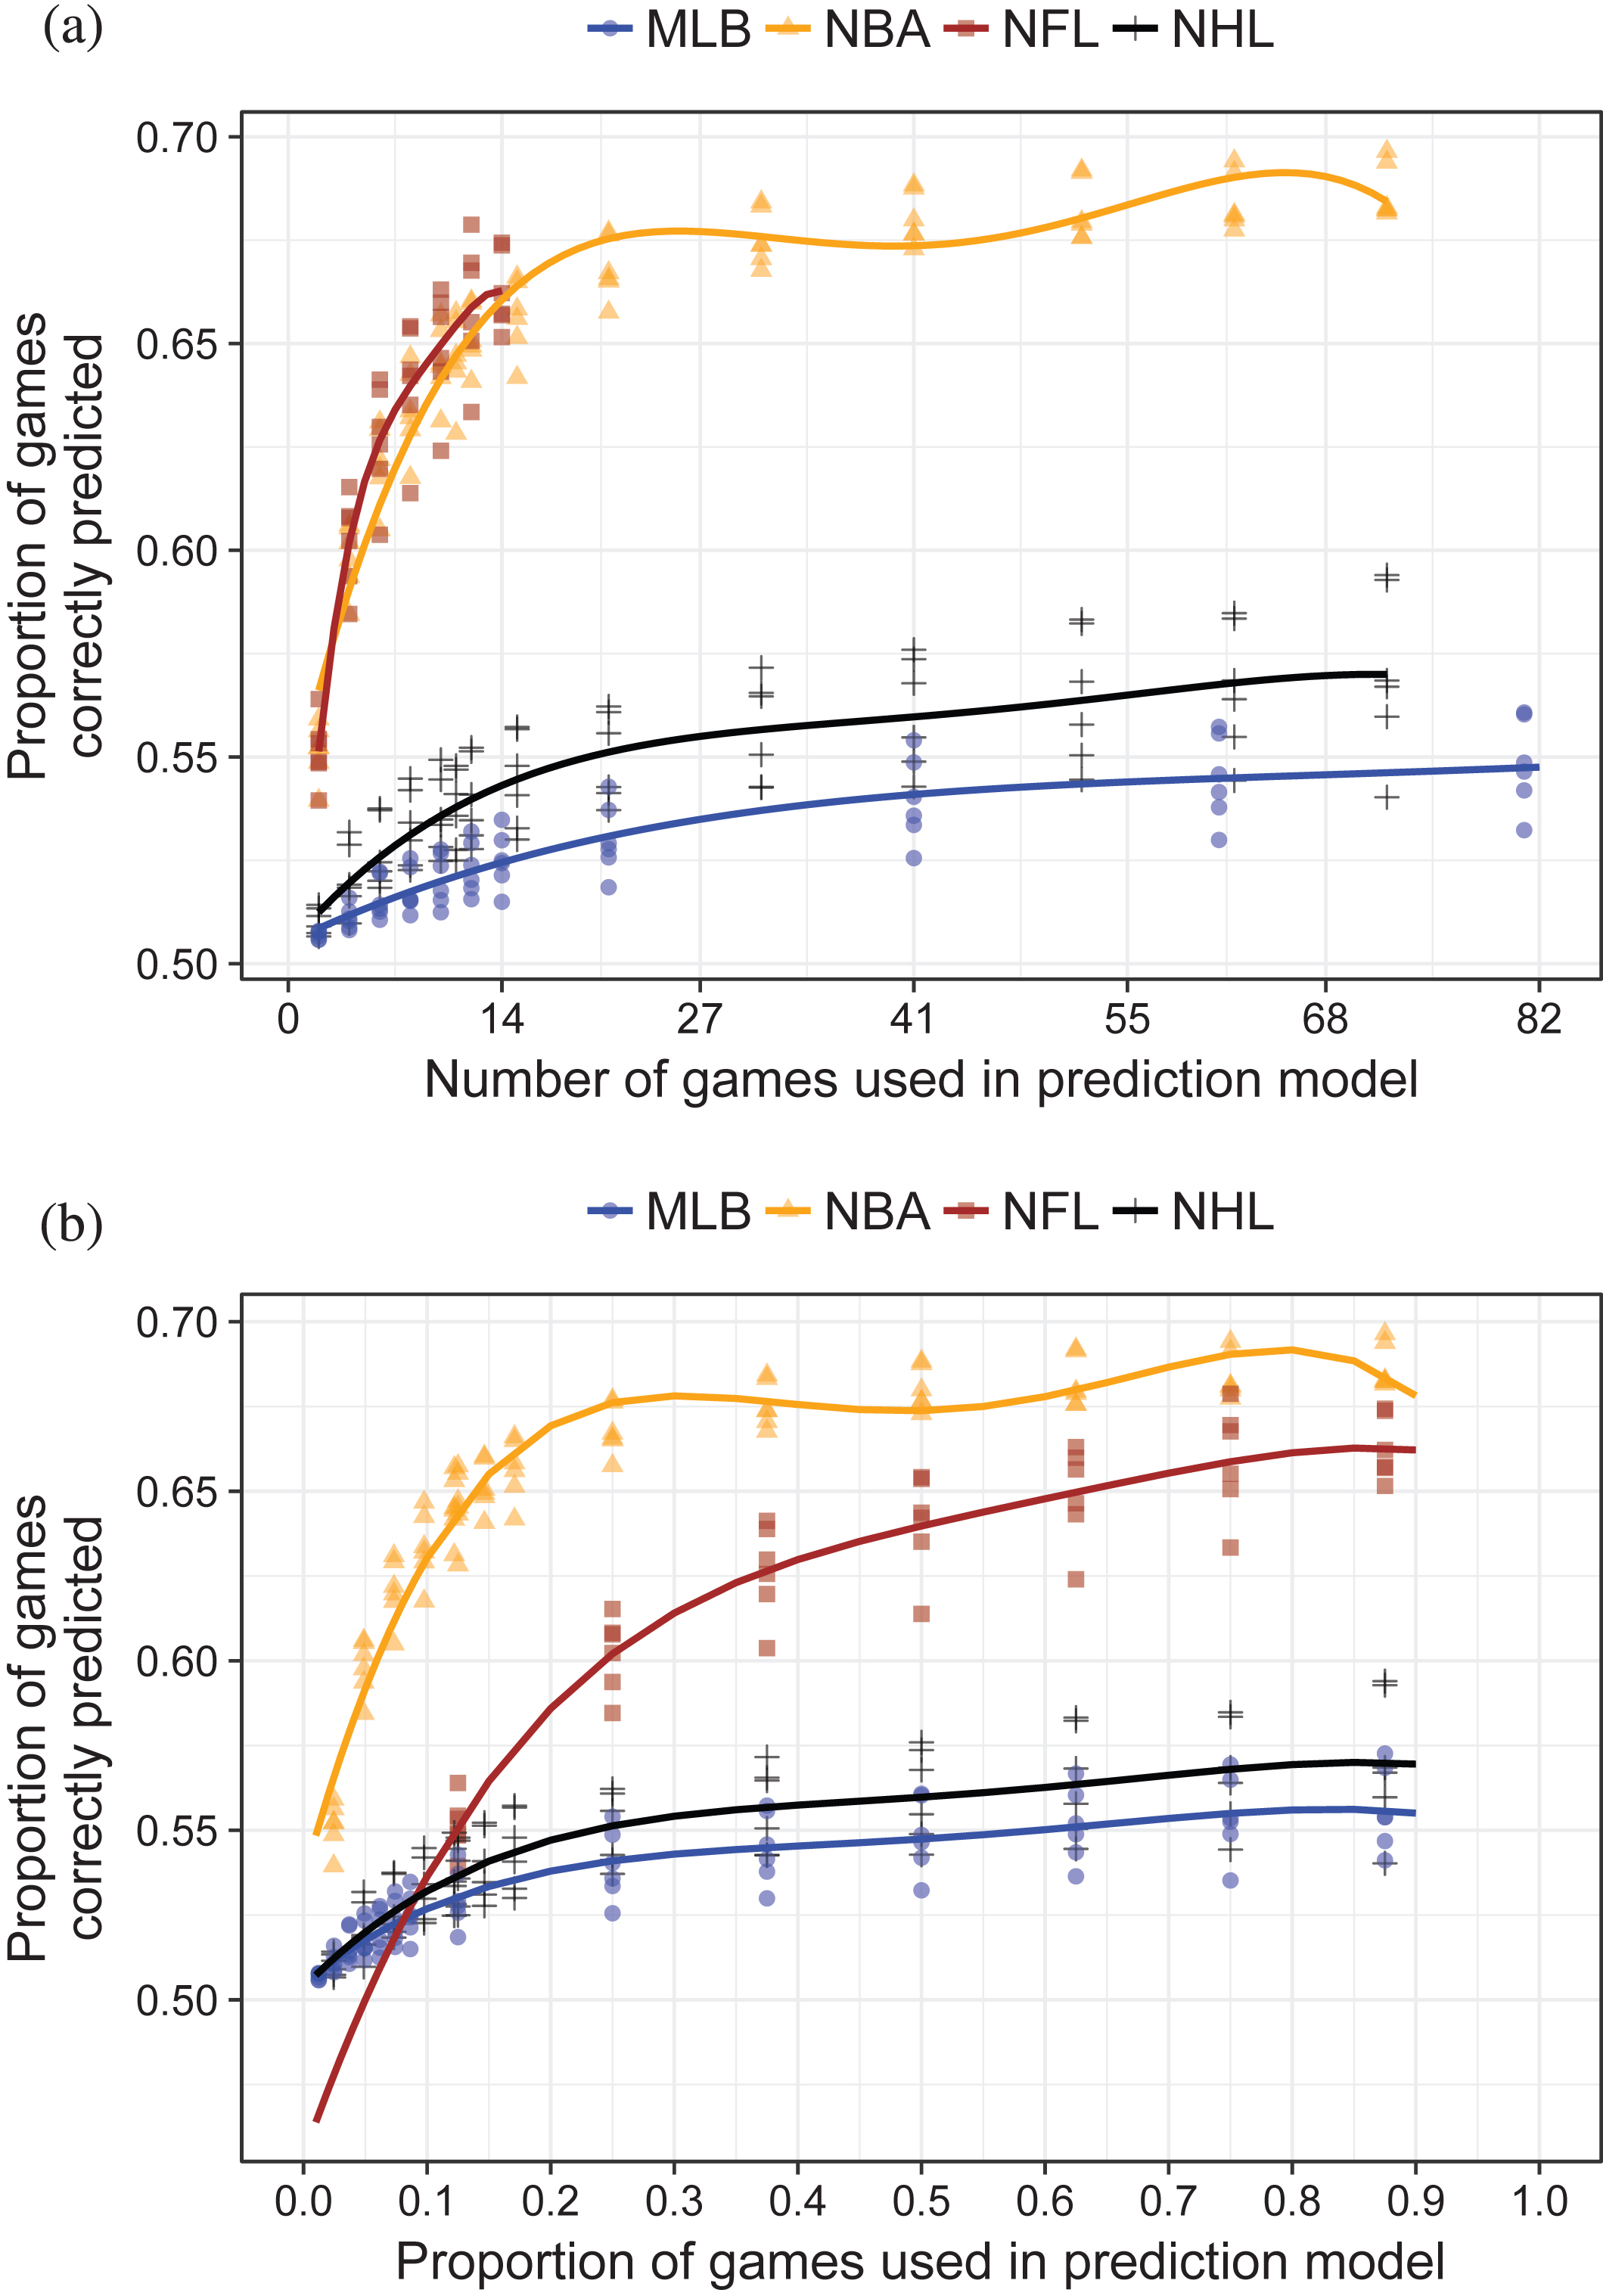 Proportion of games correctly predicted by margin of victory model (IMOV) for four major U.S. sports leagues. Lines are quartic polynomials fit to data from each sport aggregated across the years 2010-2016. (a) Information accrual rate by number of games used in prediction model. Number of games truncated at 41 for readability. (b) Information accrual rate by proportion of season games used in prediction model.